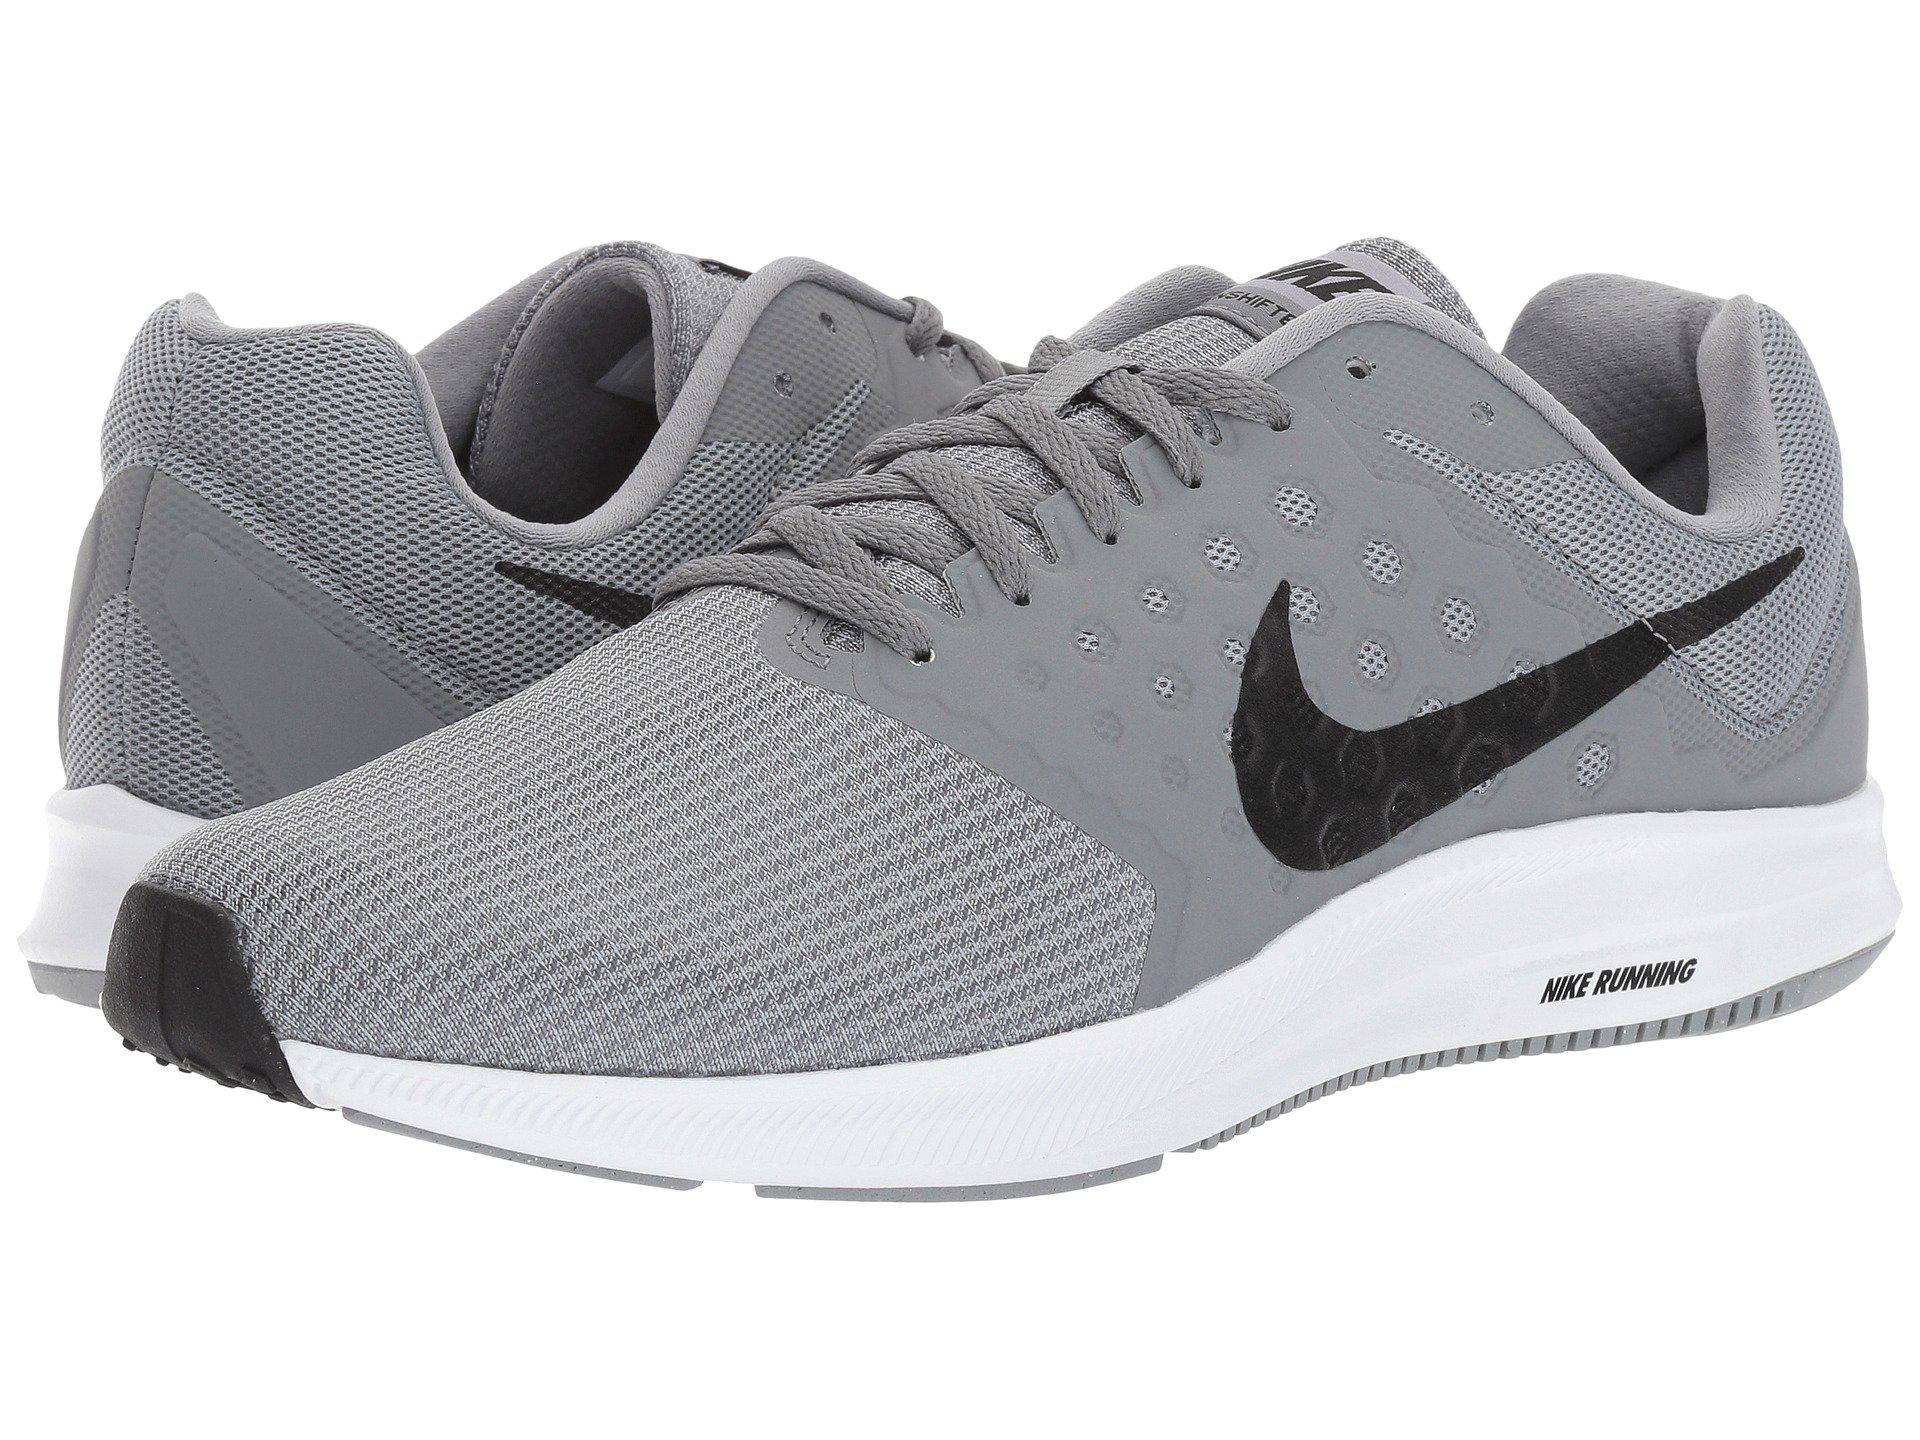 Nike Synthetic Downshifter 7 Running Shoes in Gray for Men - Lyst